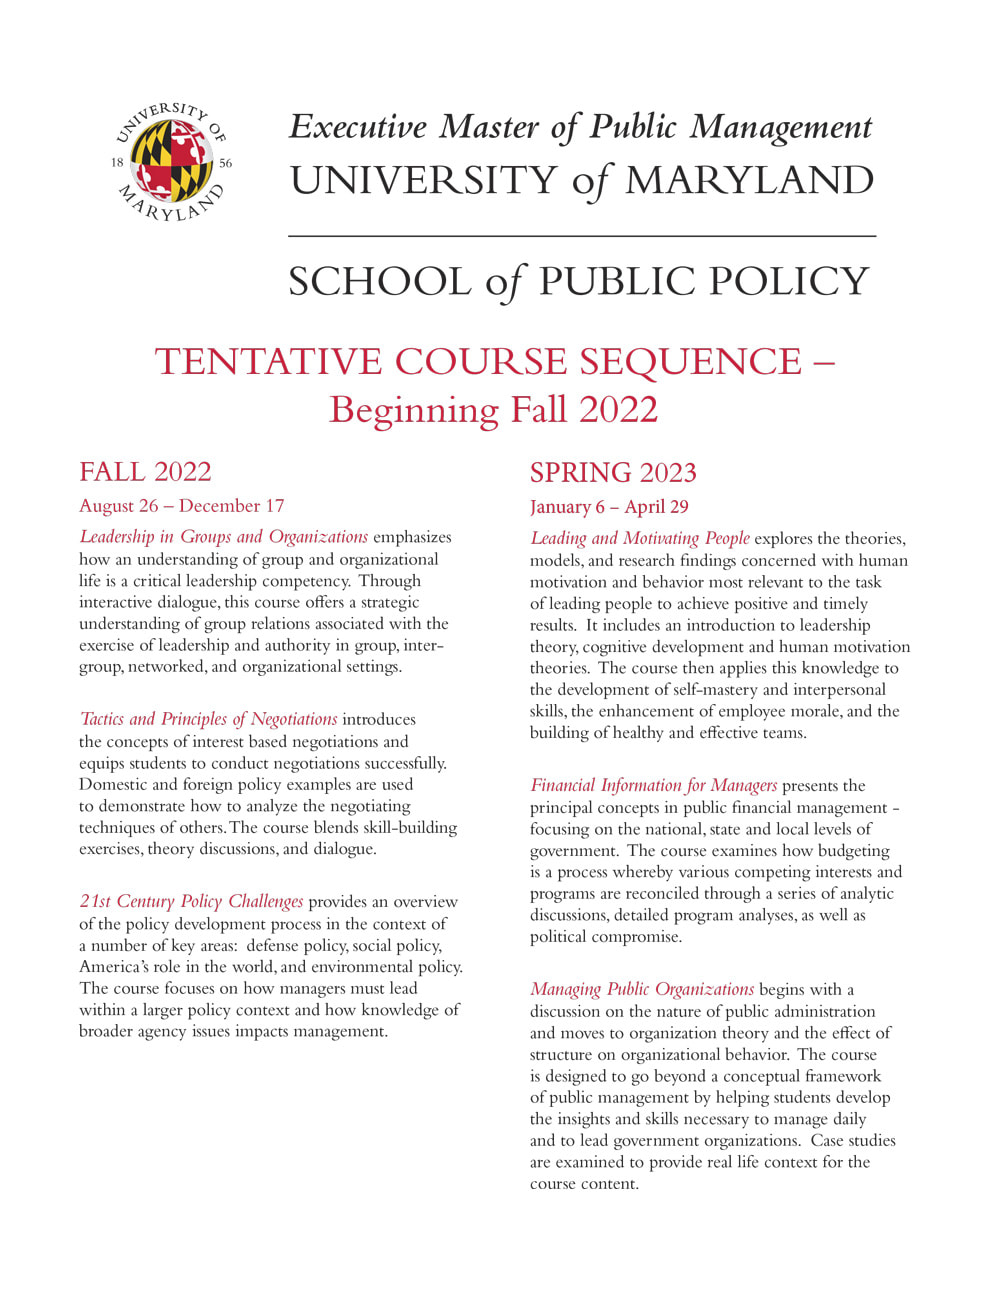 School of Public Policy • Executive Master of Public Management • Fall 2022 Tentative Course Sequence -- Booklet Flyer